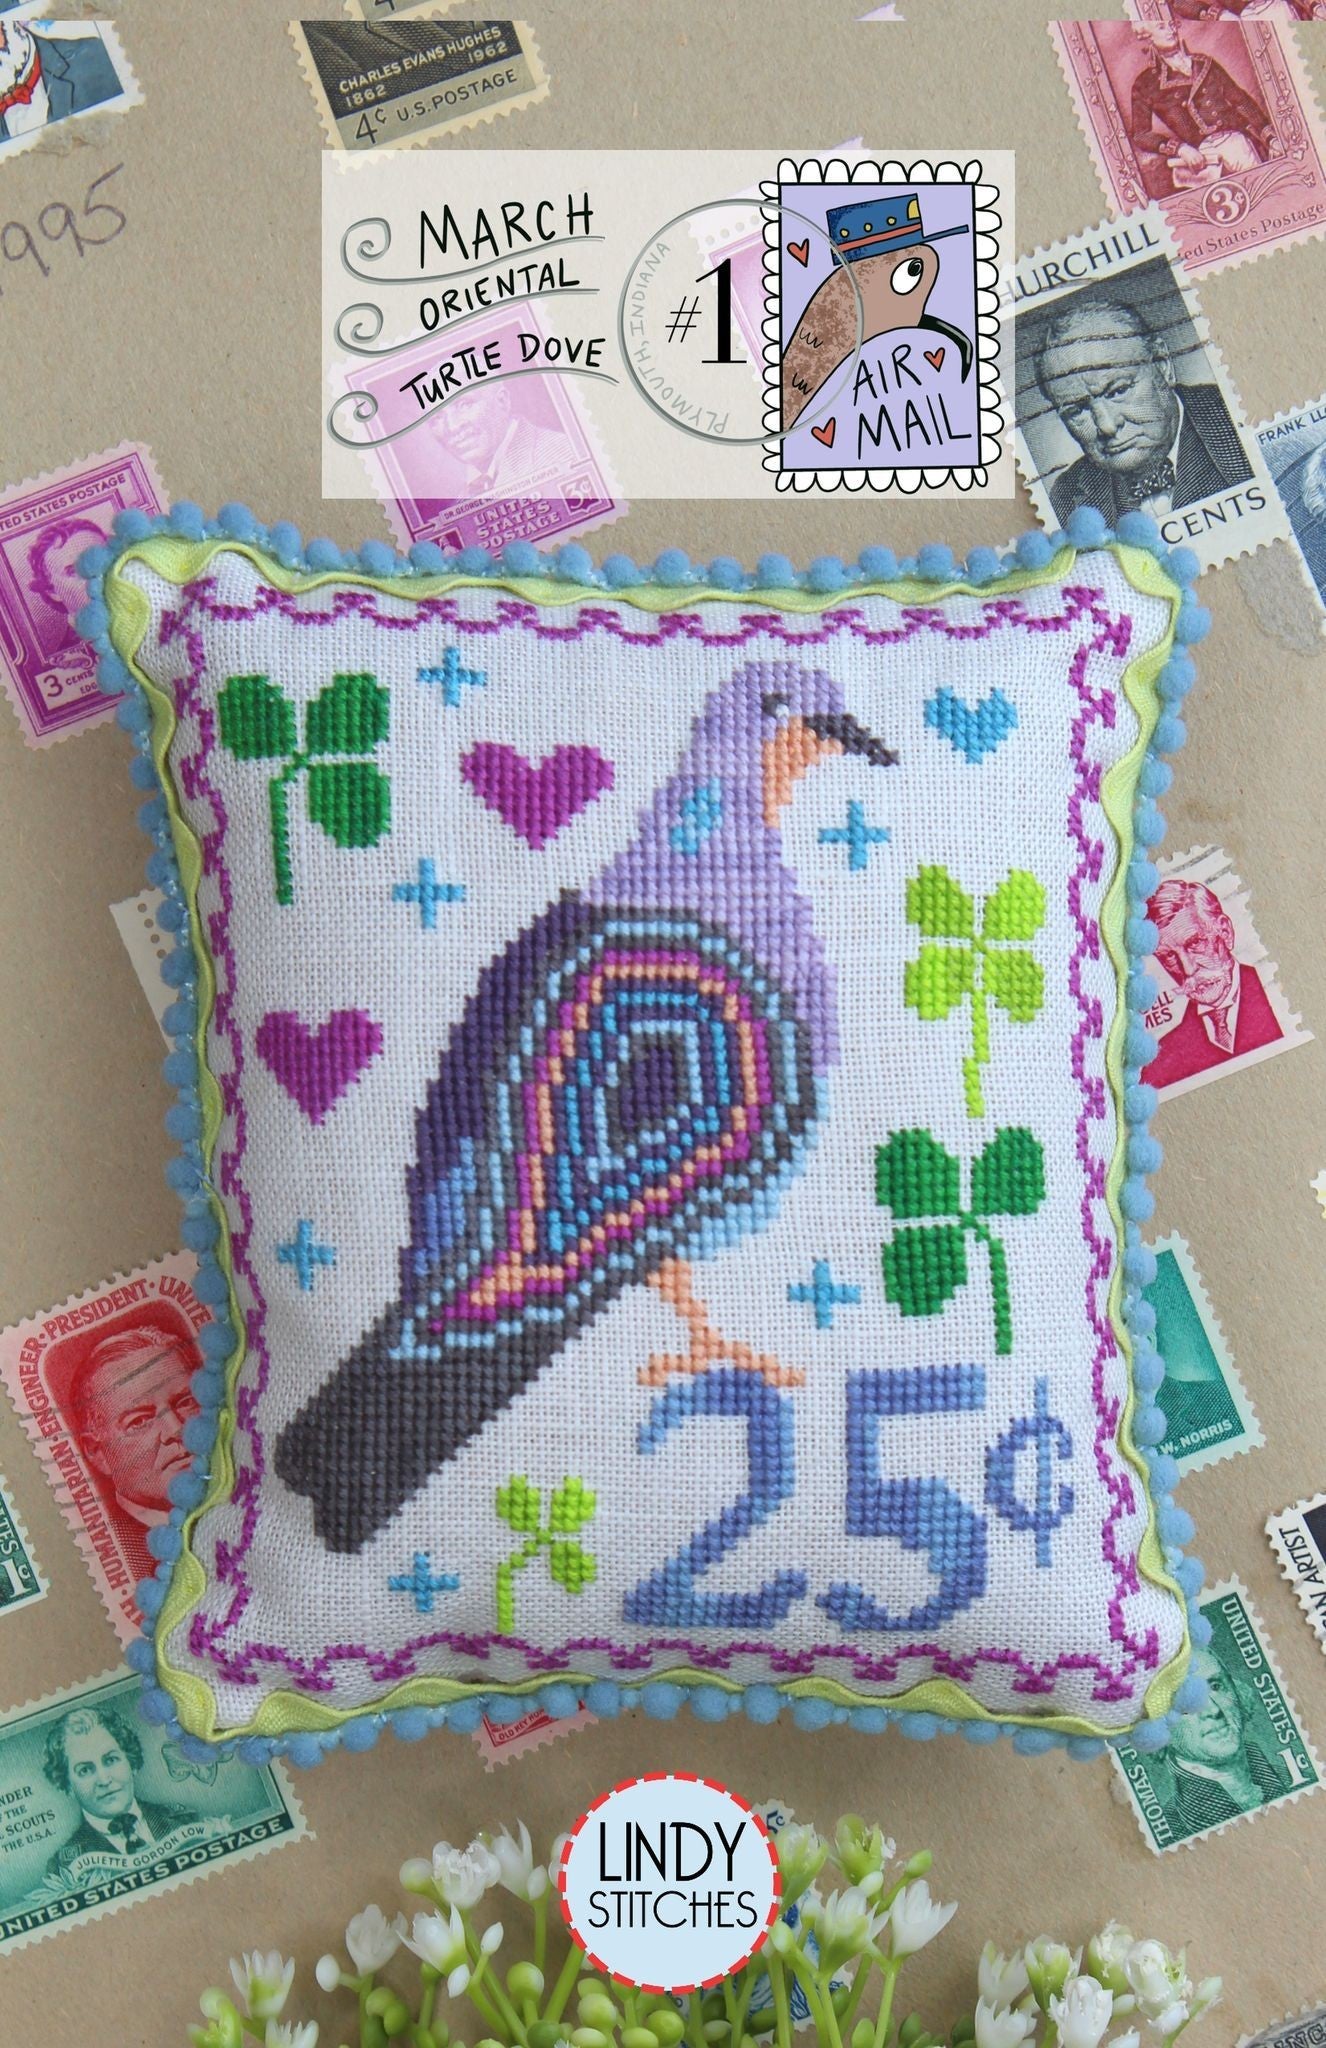 Air Mail March - Oriental Turtle Dove  by Lindy Stitches